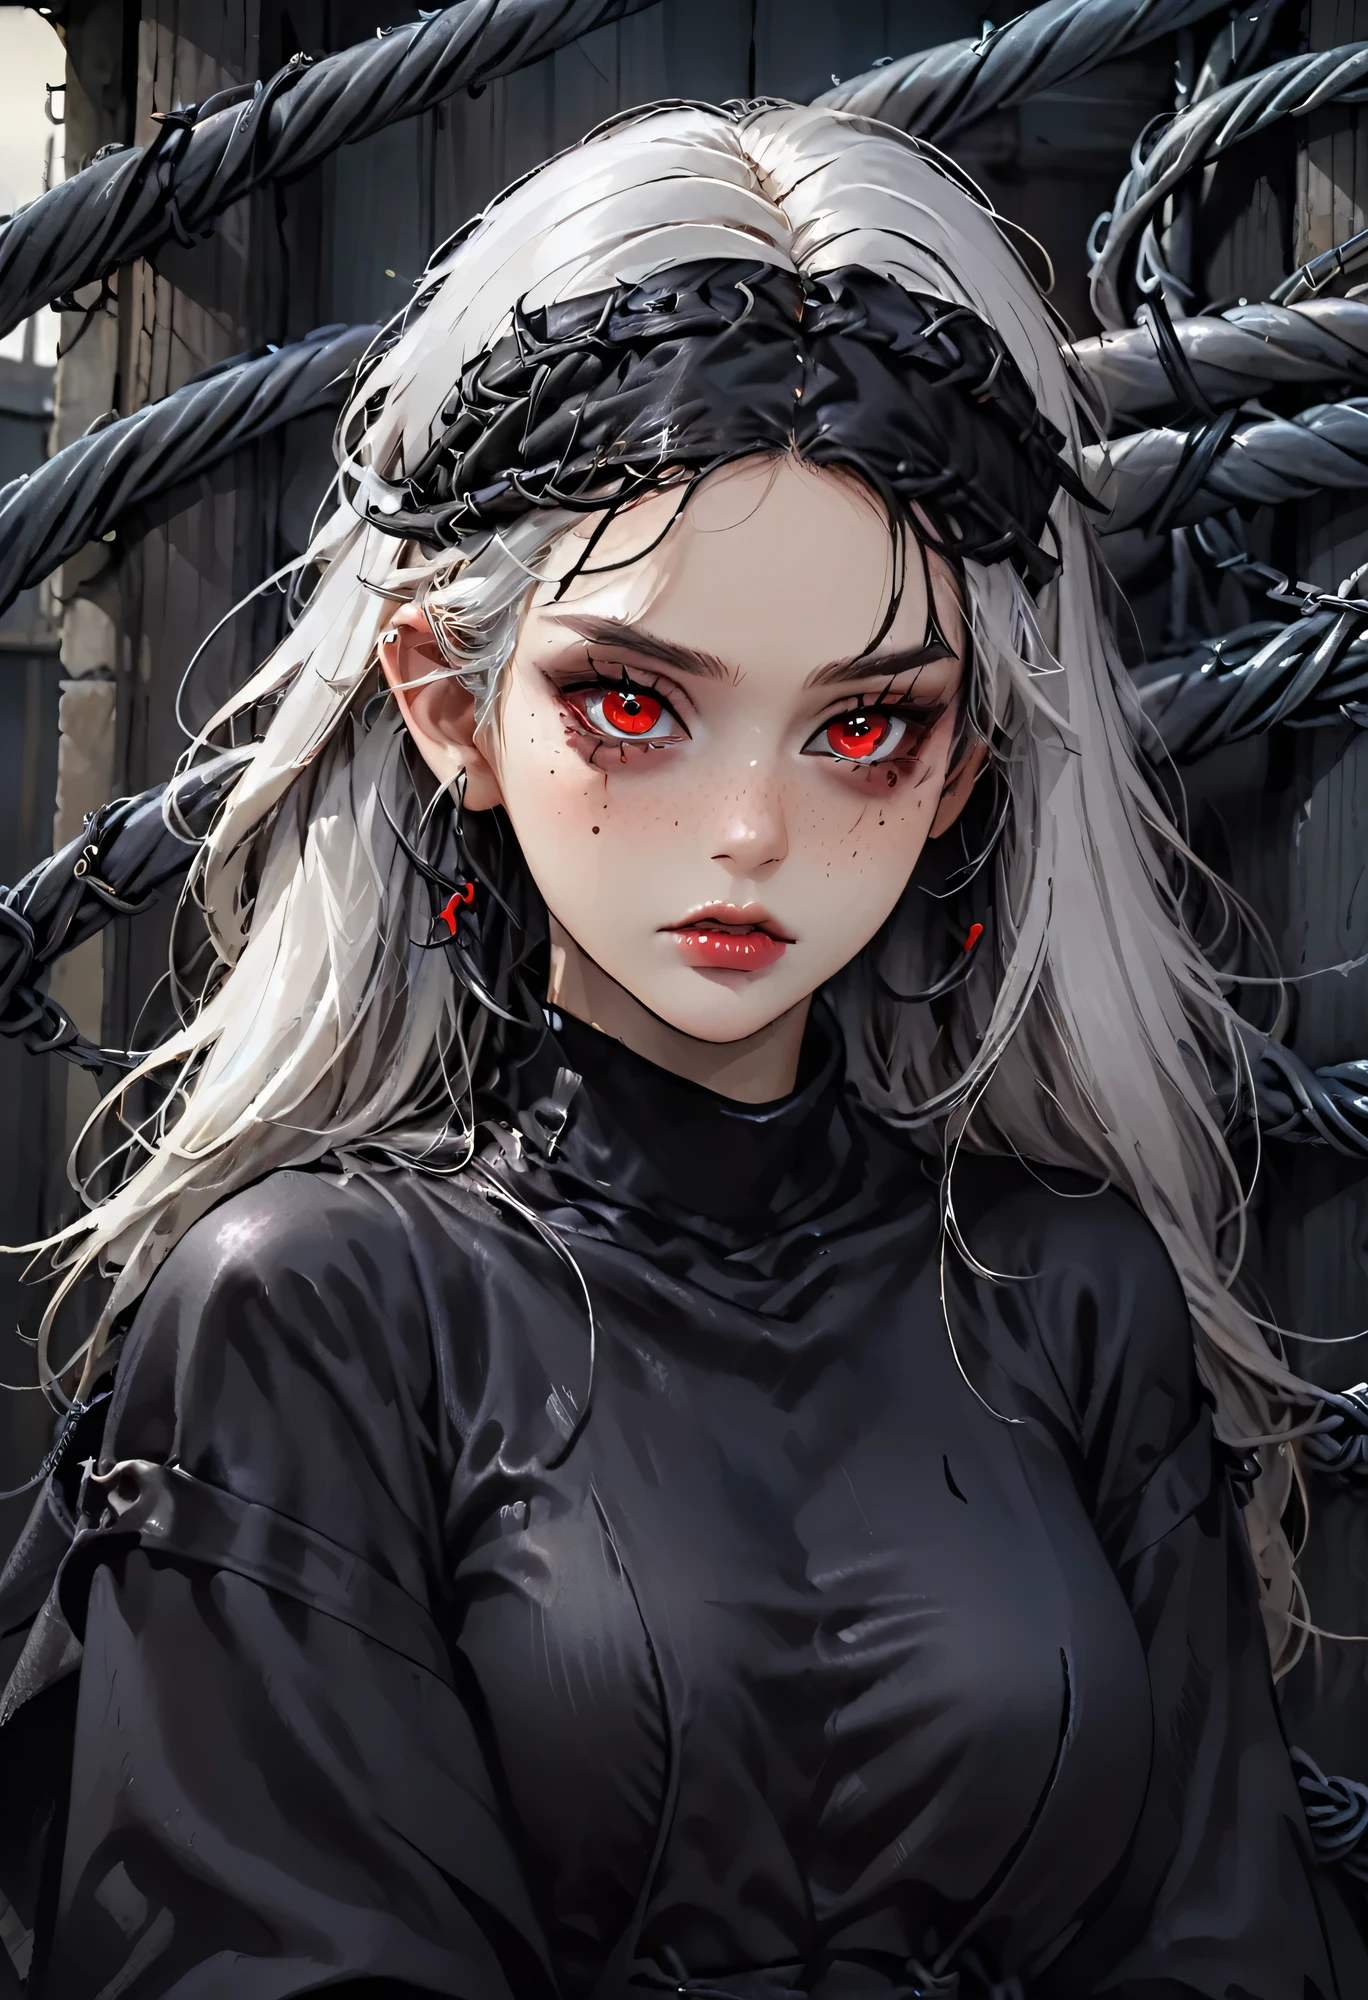 1 girl, white hair, piercing red eyes, slight smirk, full lips, black nails, barbed wire everywhere (black barbed wire coils), (best quality,4k,8k,highres,masterpiece:1.2),ultra-detailed,(realistic,photorealistic,photo-realistic:1.37),dark fantasy, horror, gothic,dramatic chiaroscuro lighting,moody and atmospheric